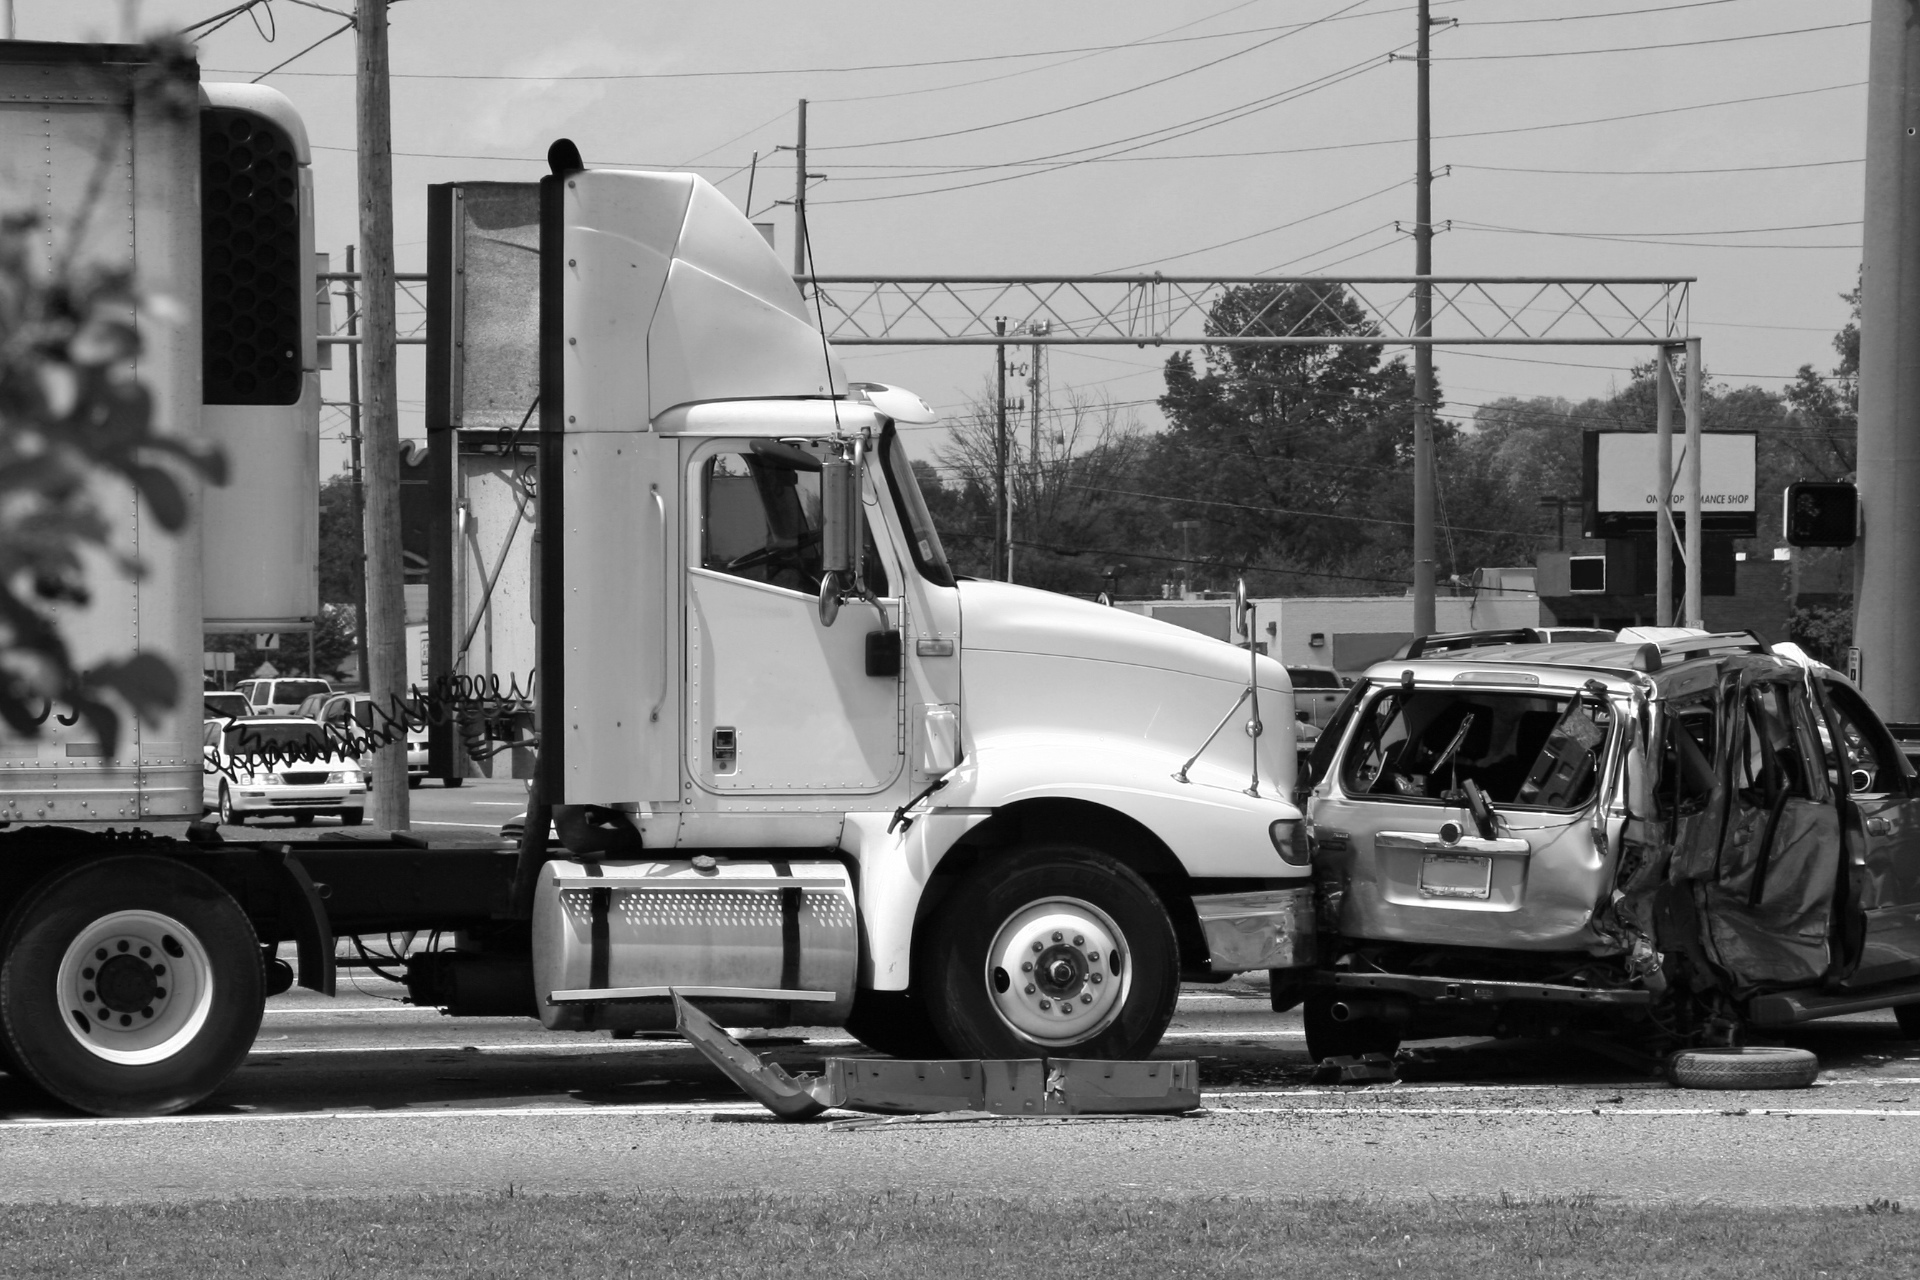 H&E Personal Injury Attorneys | What We Do - Truck Accident